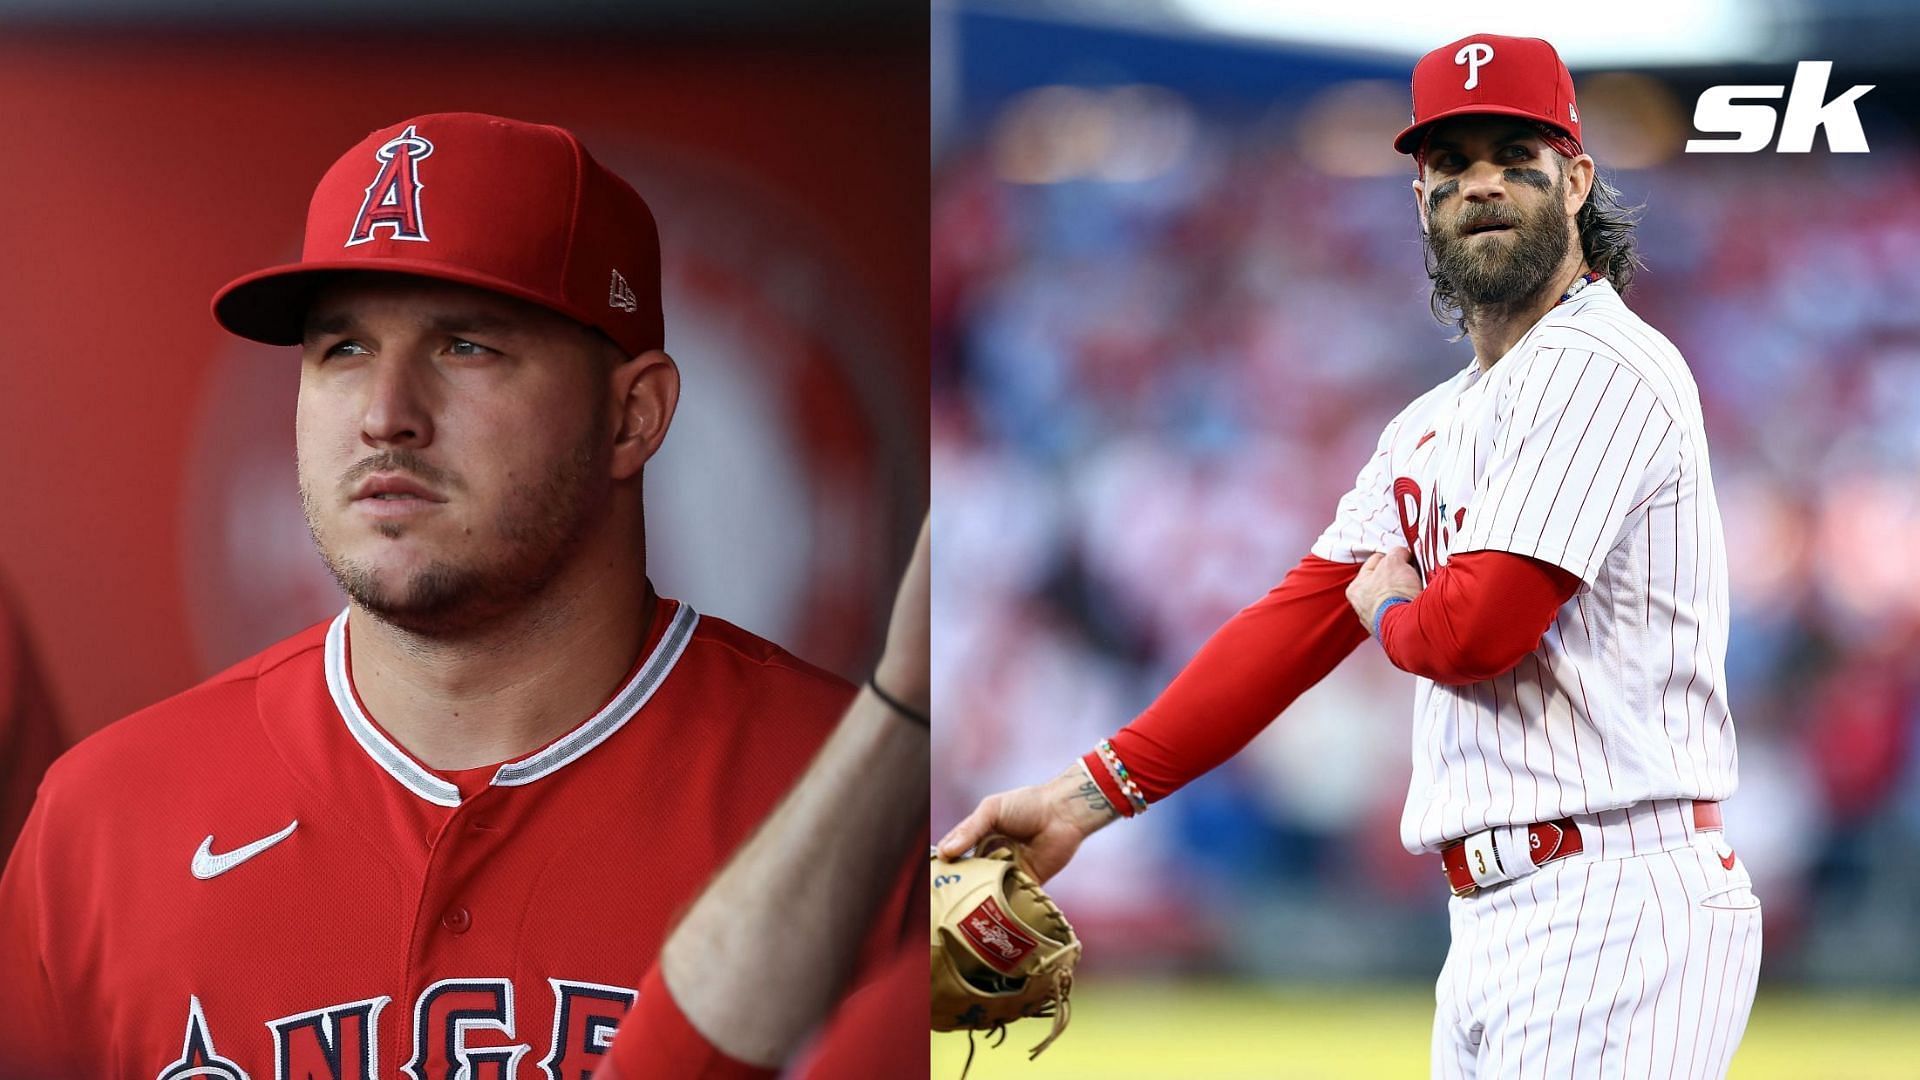 Bryce Harper said that he would try to recruit Mike Trout back in 2019